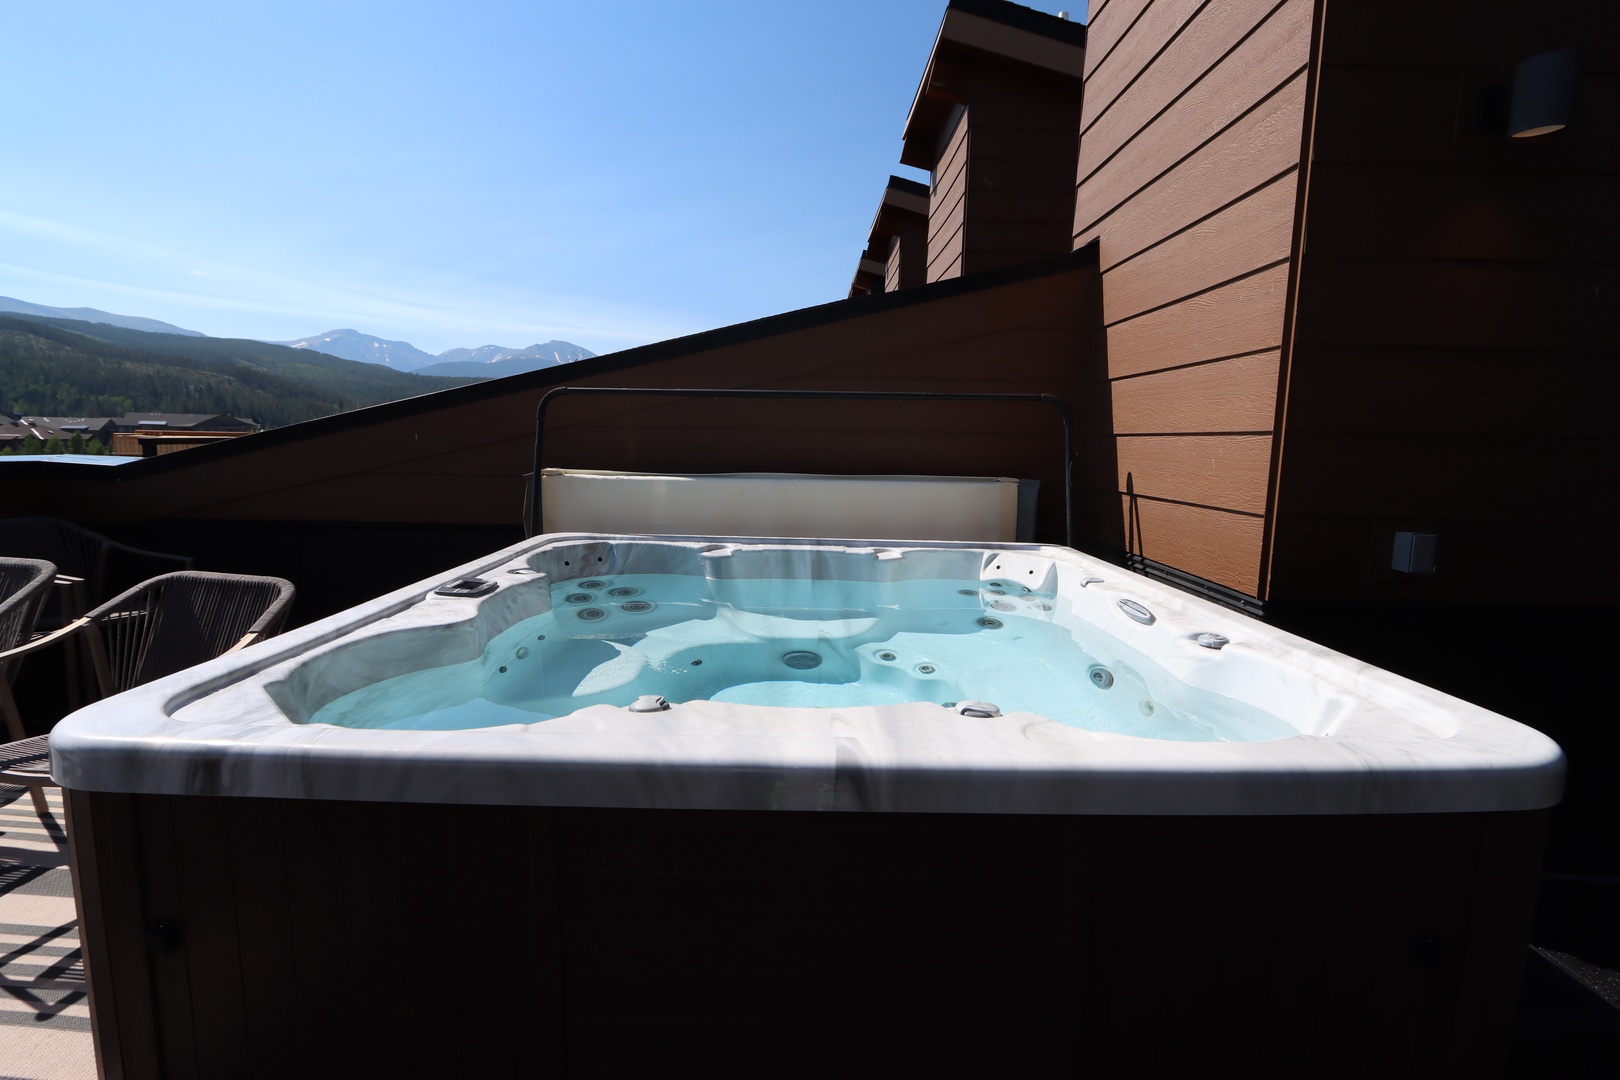 The hot tub is for exclusive use by the guests